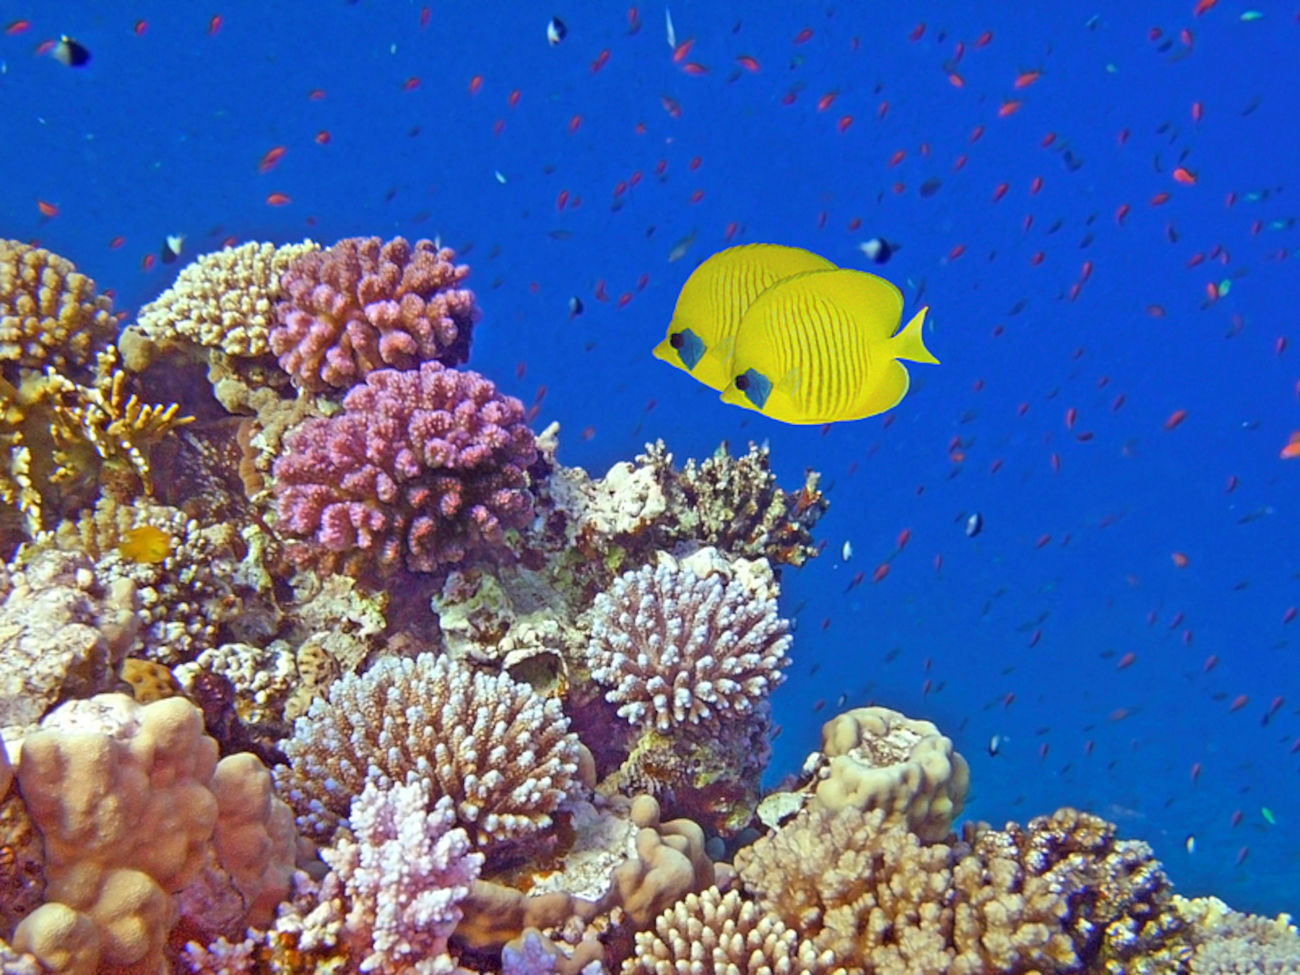 A photo of a coral reef with bluecheek butterflyfish.